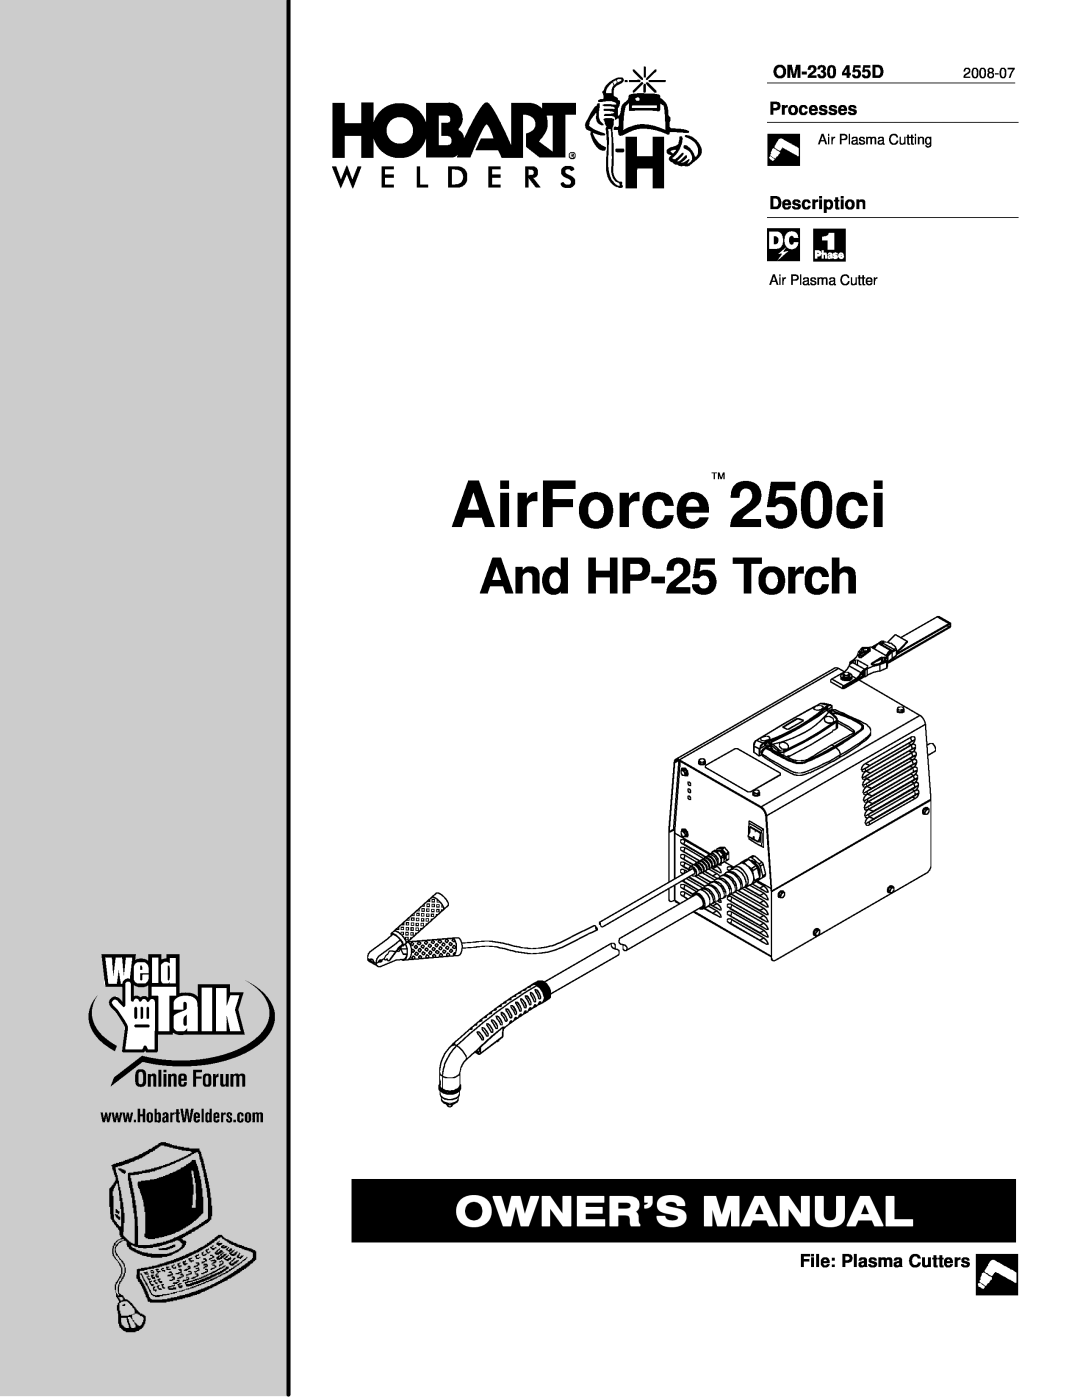 Hobart Welding Products OM-230 455D manual AirForce 250ci, And HP-25 Torch, Processes, Description, File Plasma Cutters 